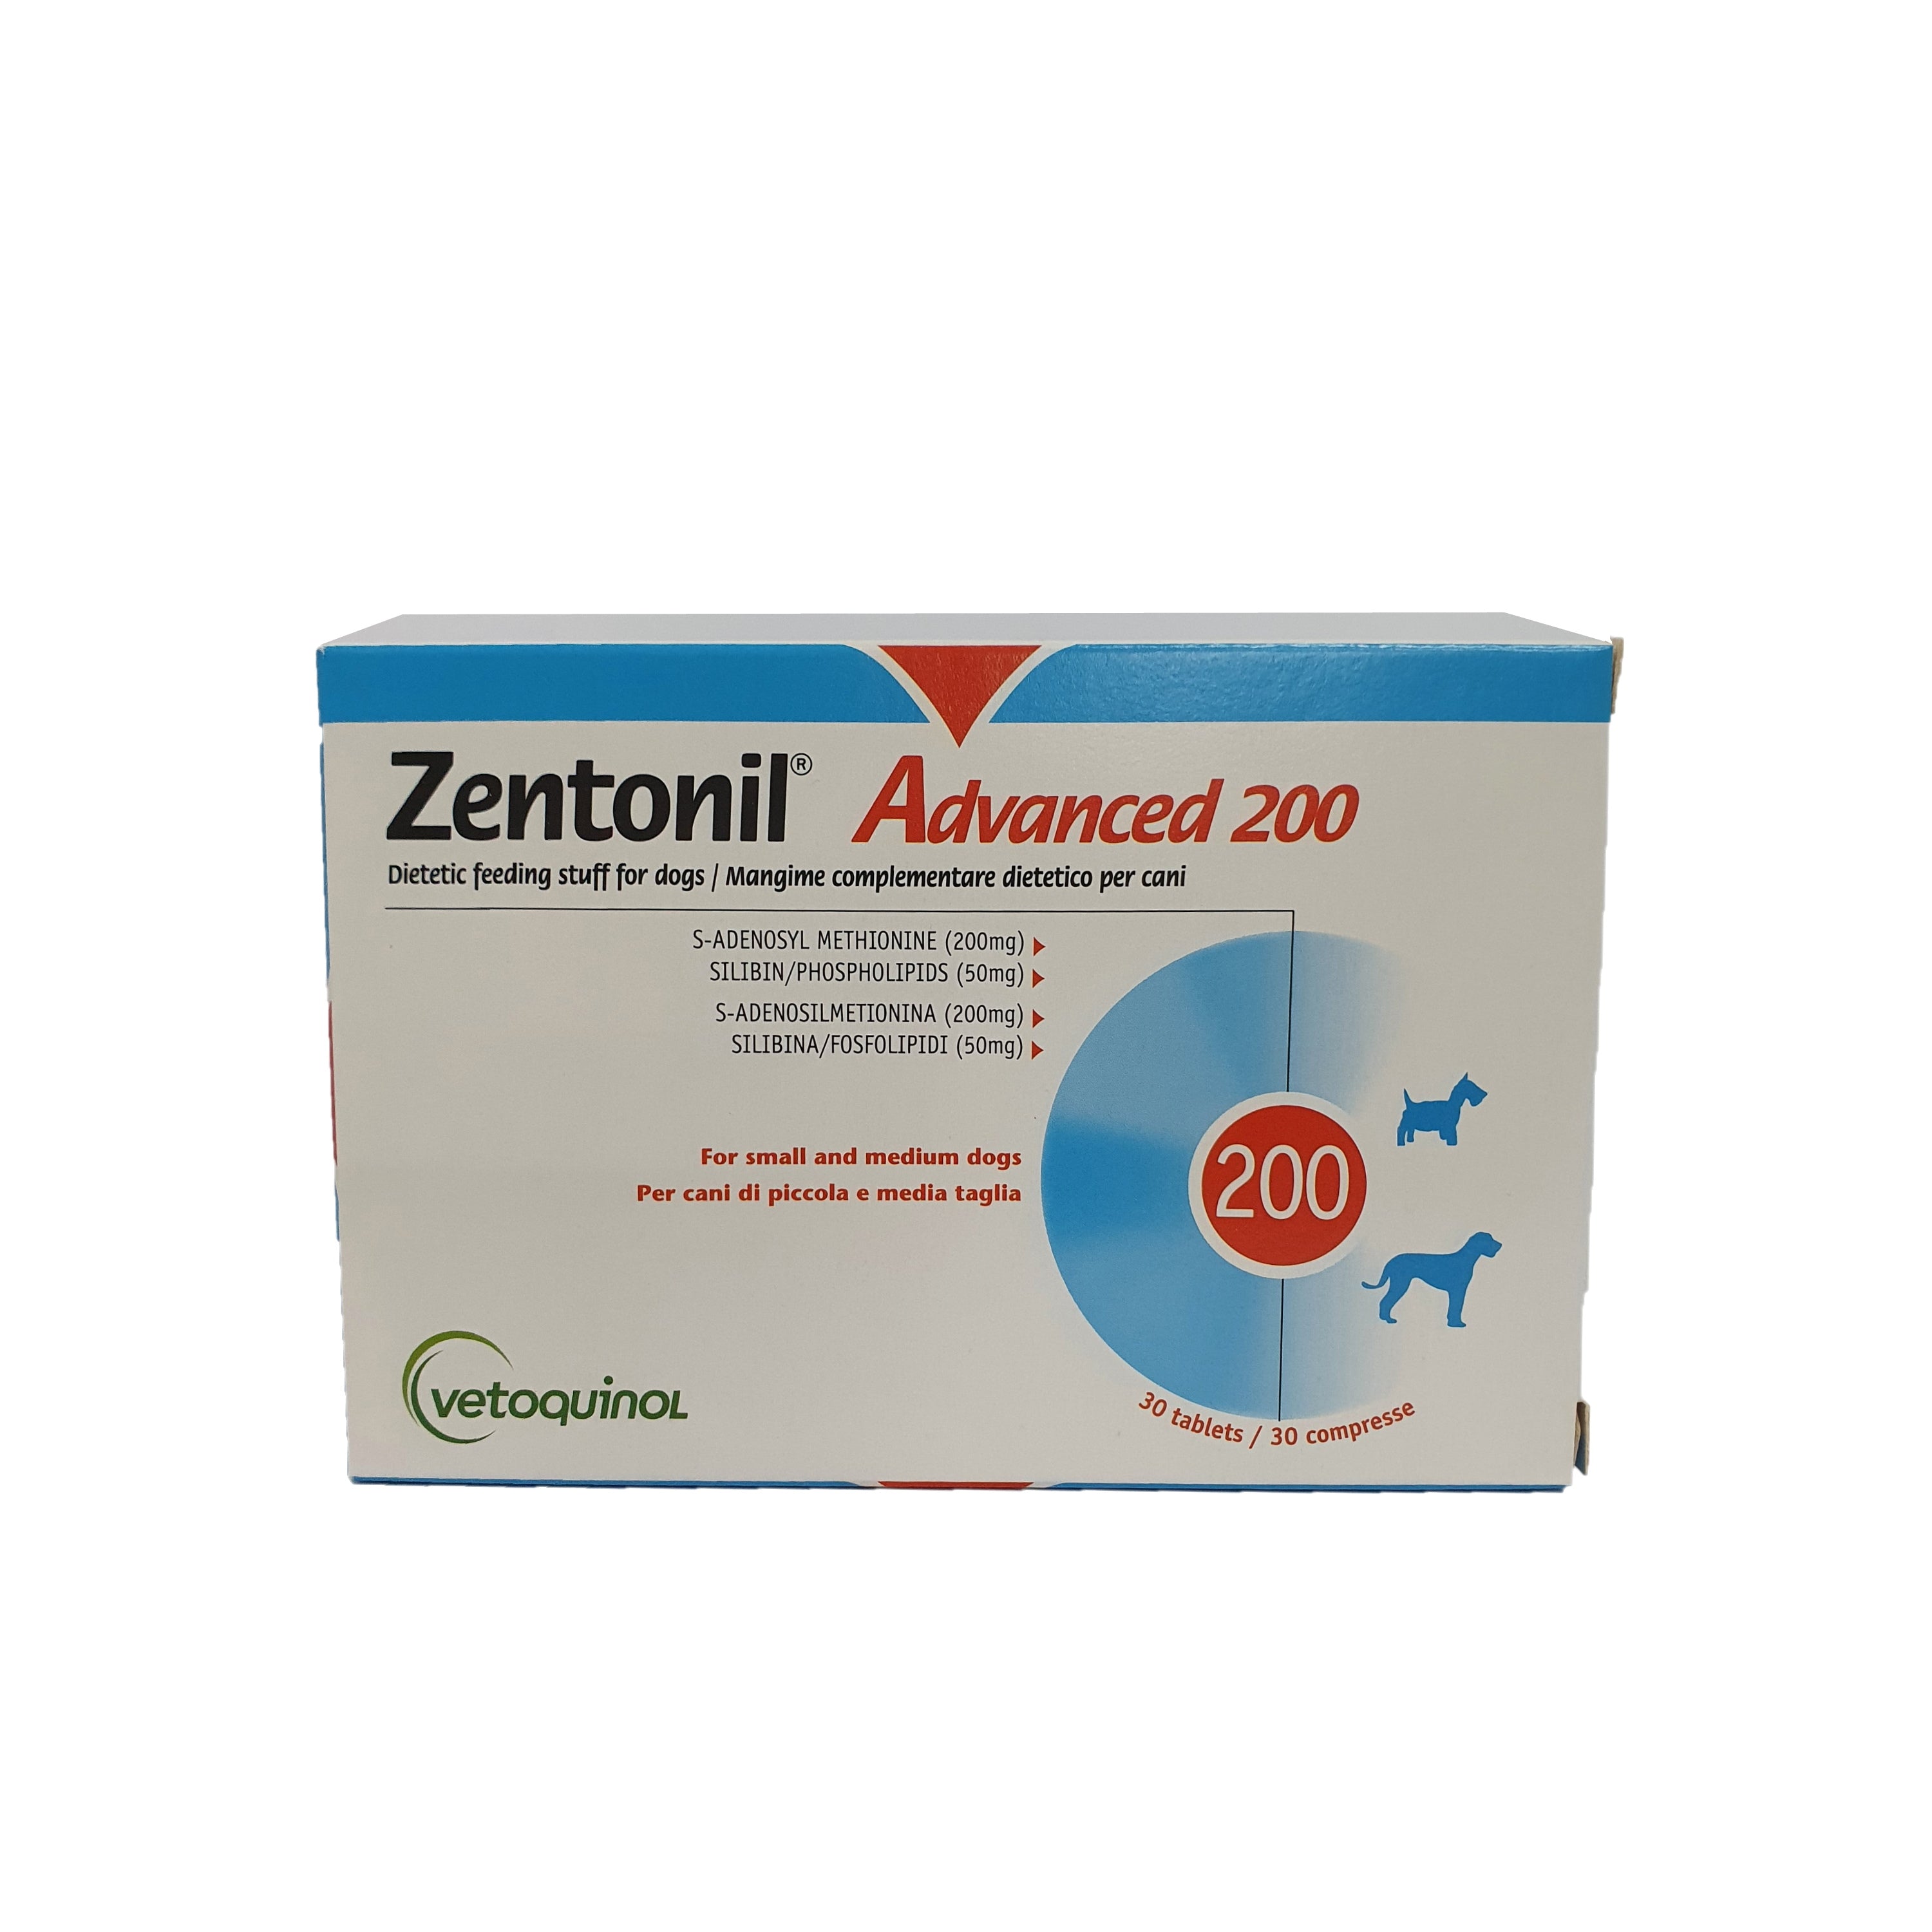 Vetoquinol Zentonil Advanced 200 Liver Function Support for Dogs Cats Pets